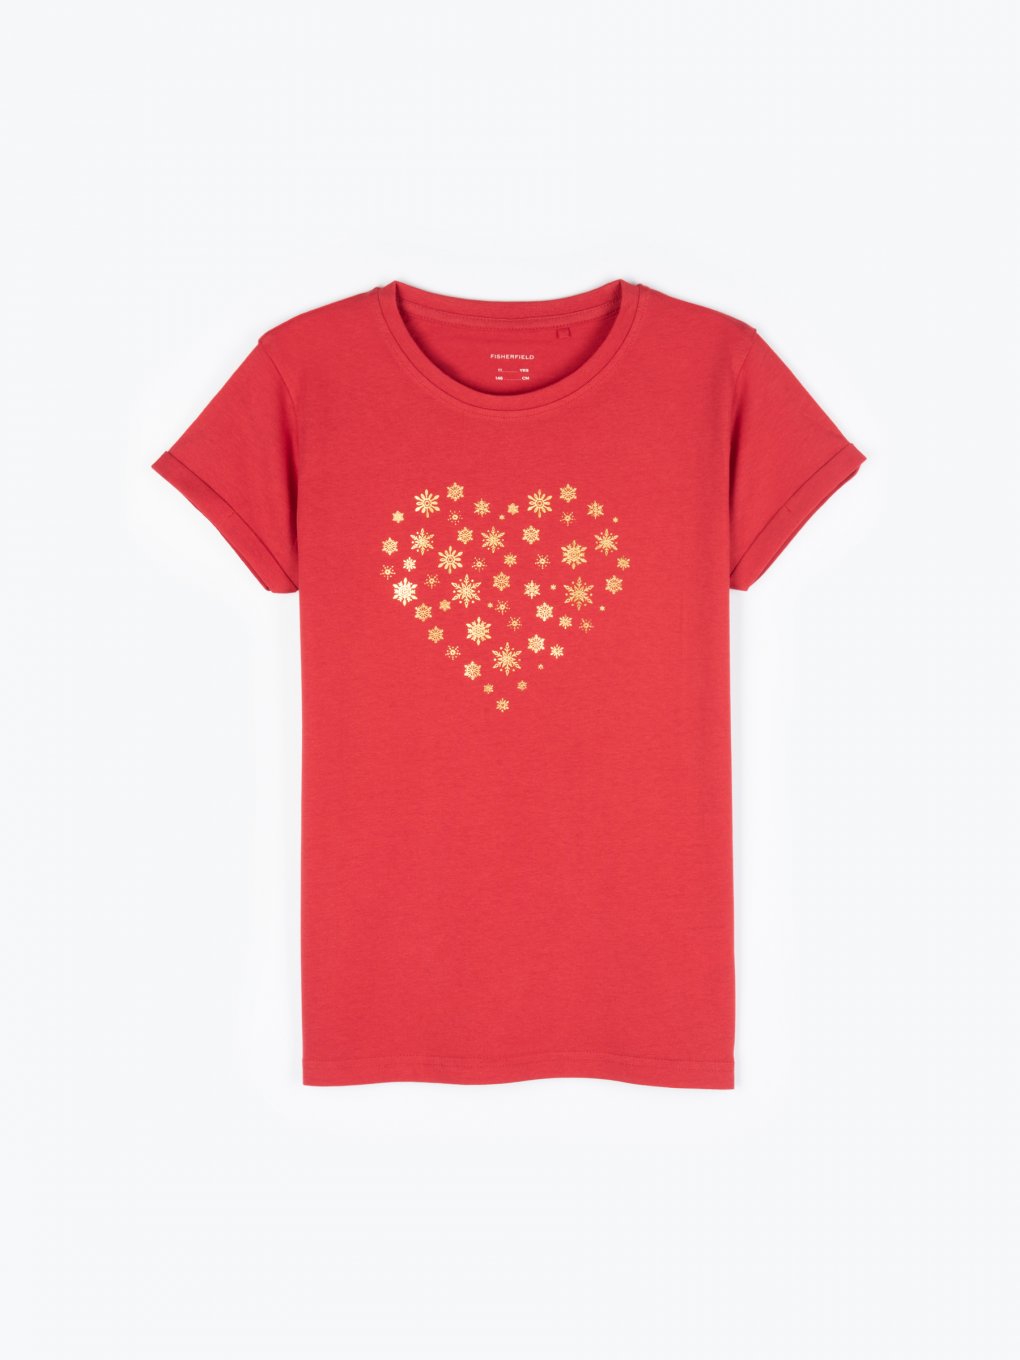 NWT Gymboree All Heart Tee Shirt Top Girls Outlet Navy Blue